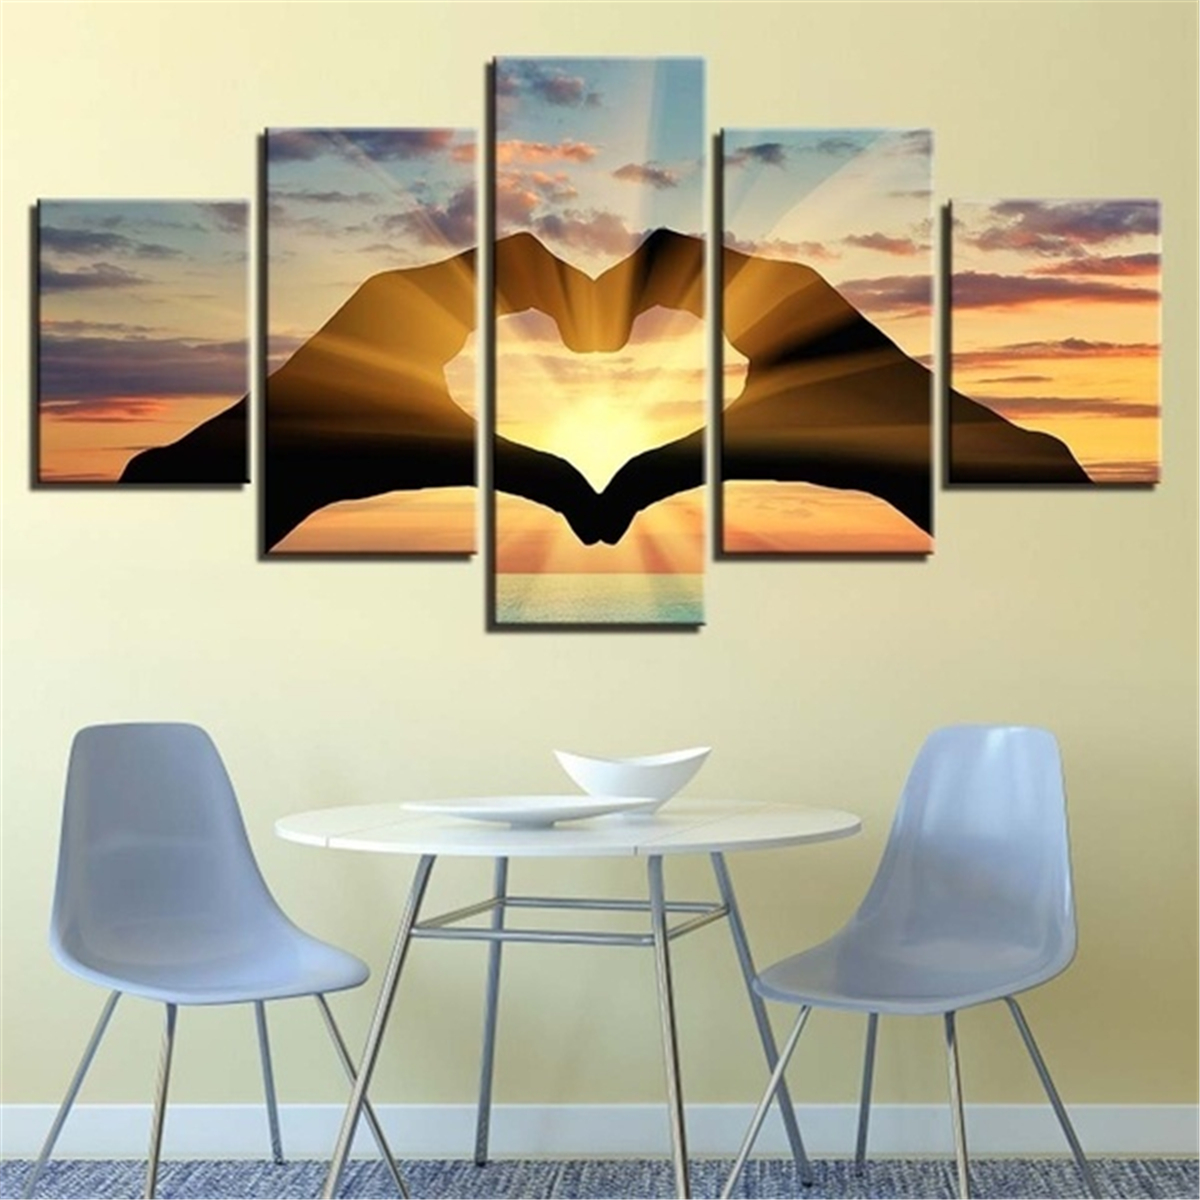 5 Pcs Wall Decorative Painting Couple Love Group Wall Decor Art Pictures Canvas Prints Home Office Hotel Decorations